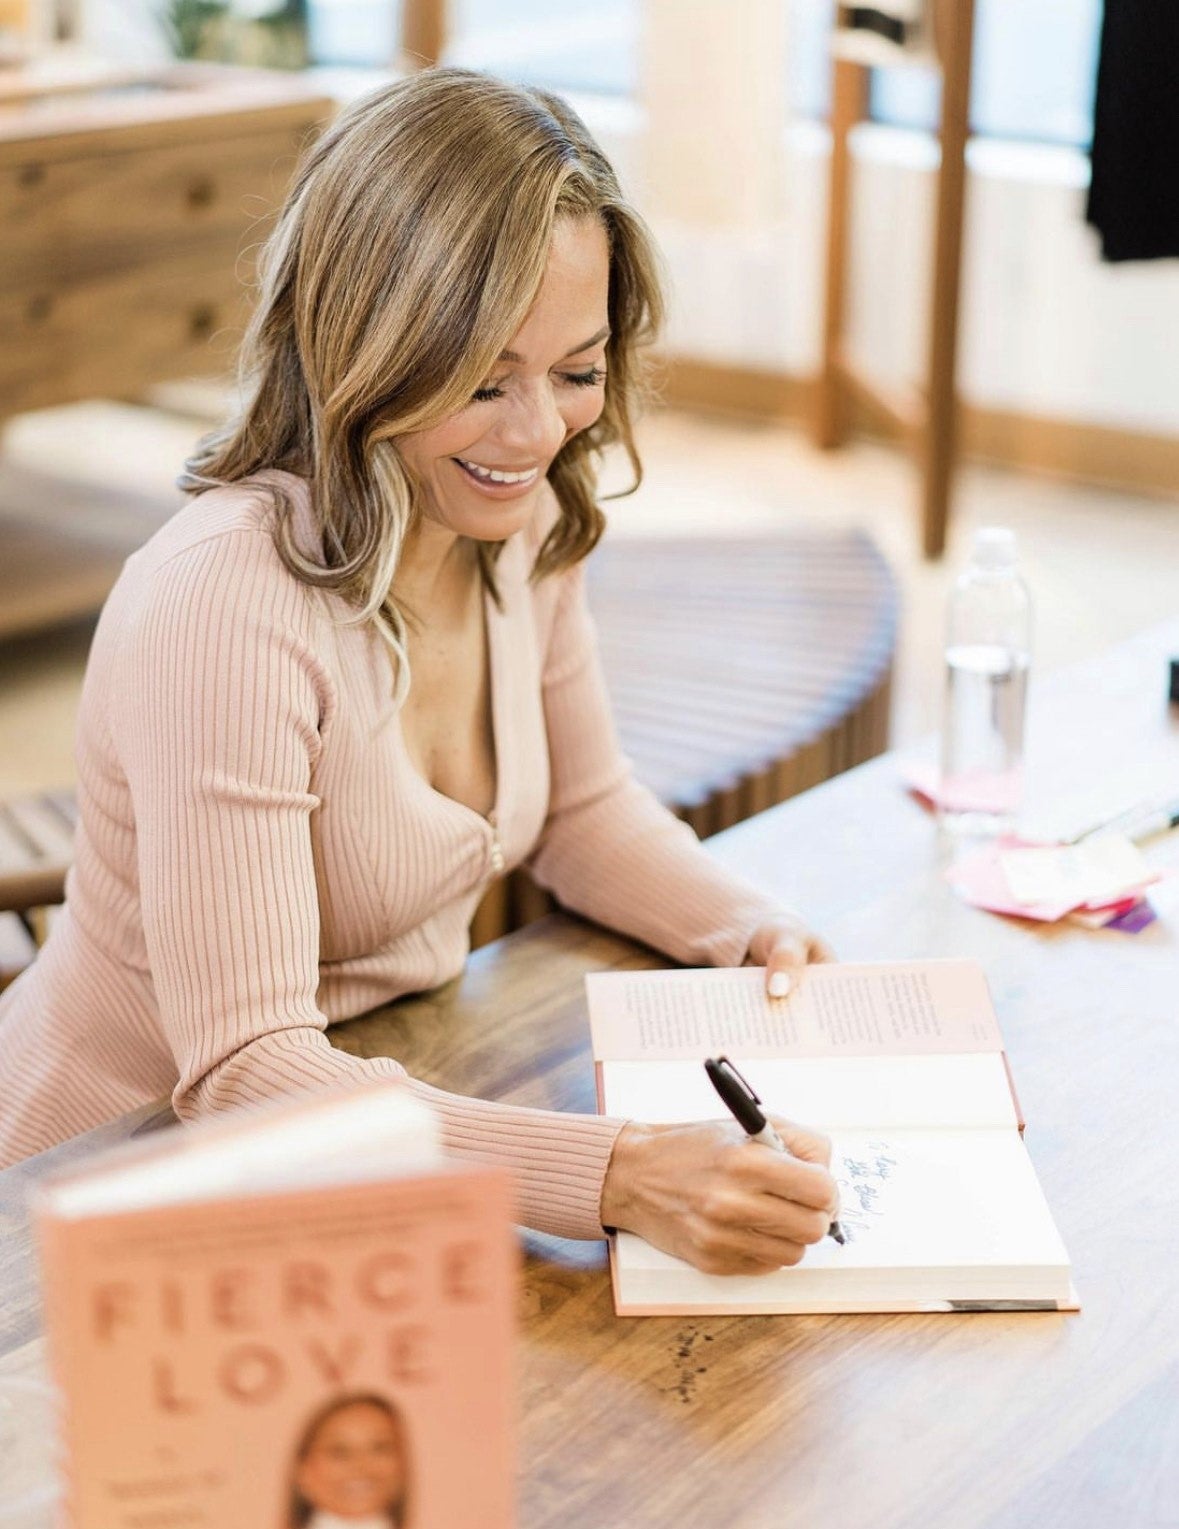 For Sonya Curry, motherhood is, above all, wild love